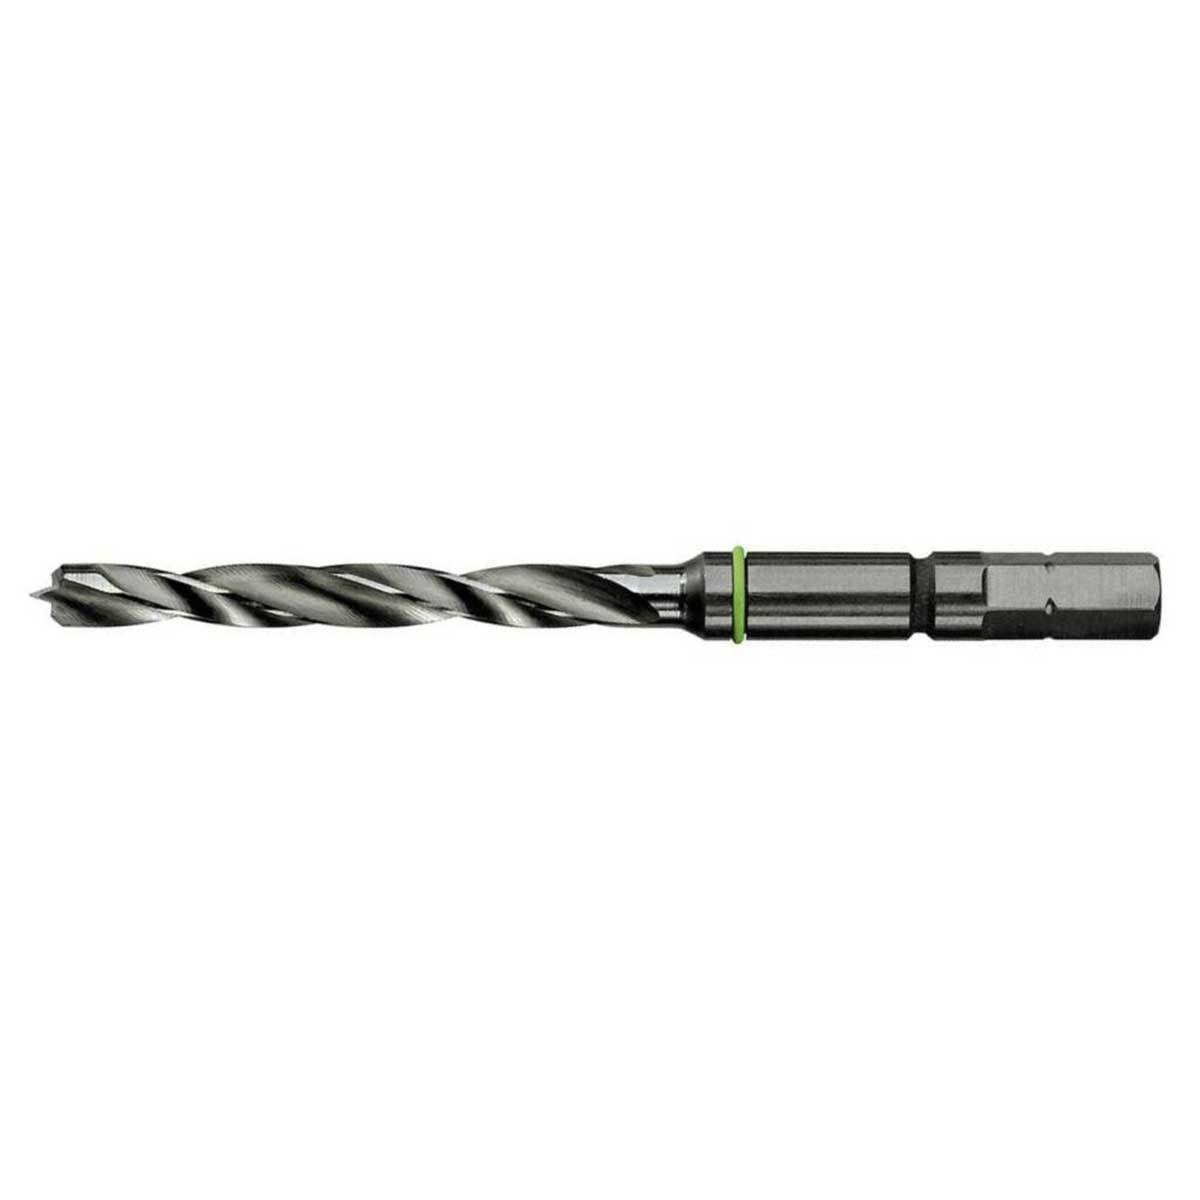 Festool Imperial Brad Point Drill Bit with Centrotec Shank CE/W 5774* 1/4 inch